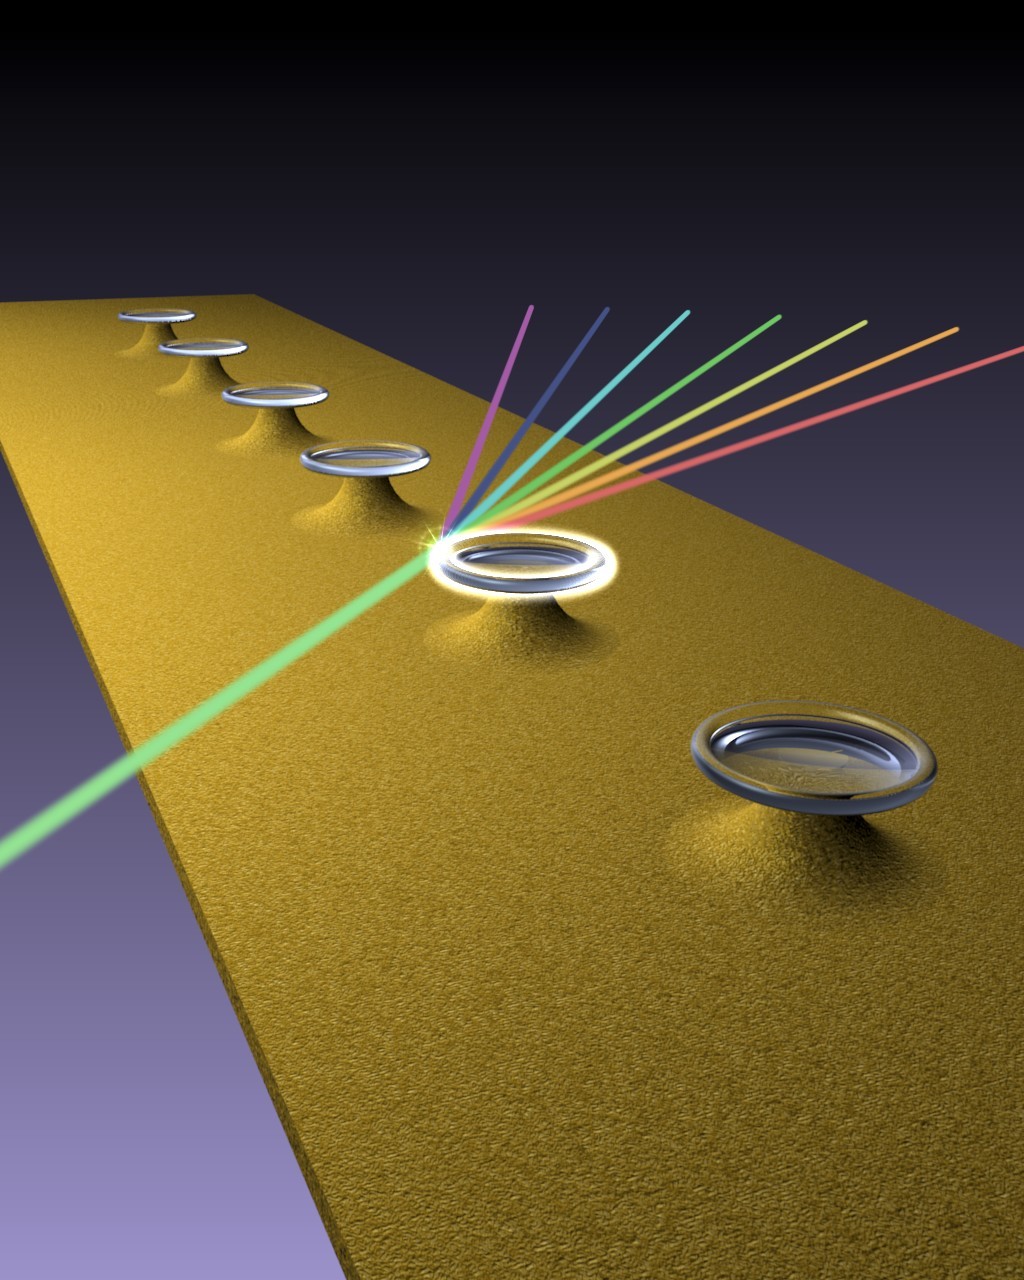 Selective laser-induced etching can be used to manufacture microresona-tors, for example for frequency comb generators. The laser process enables new geometrical shapes